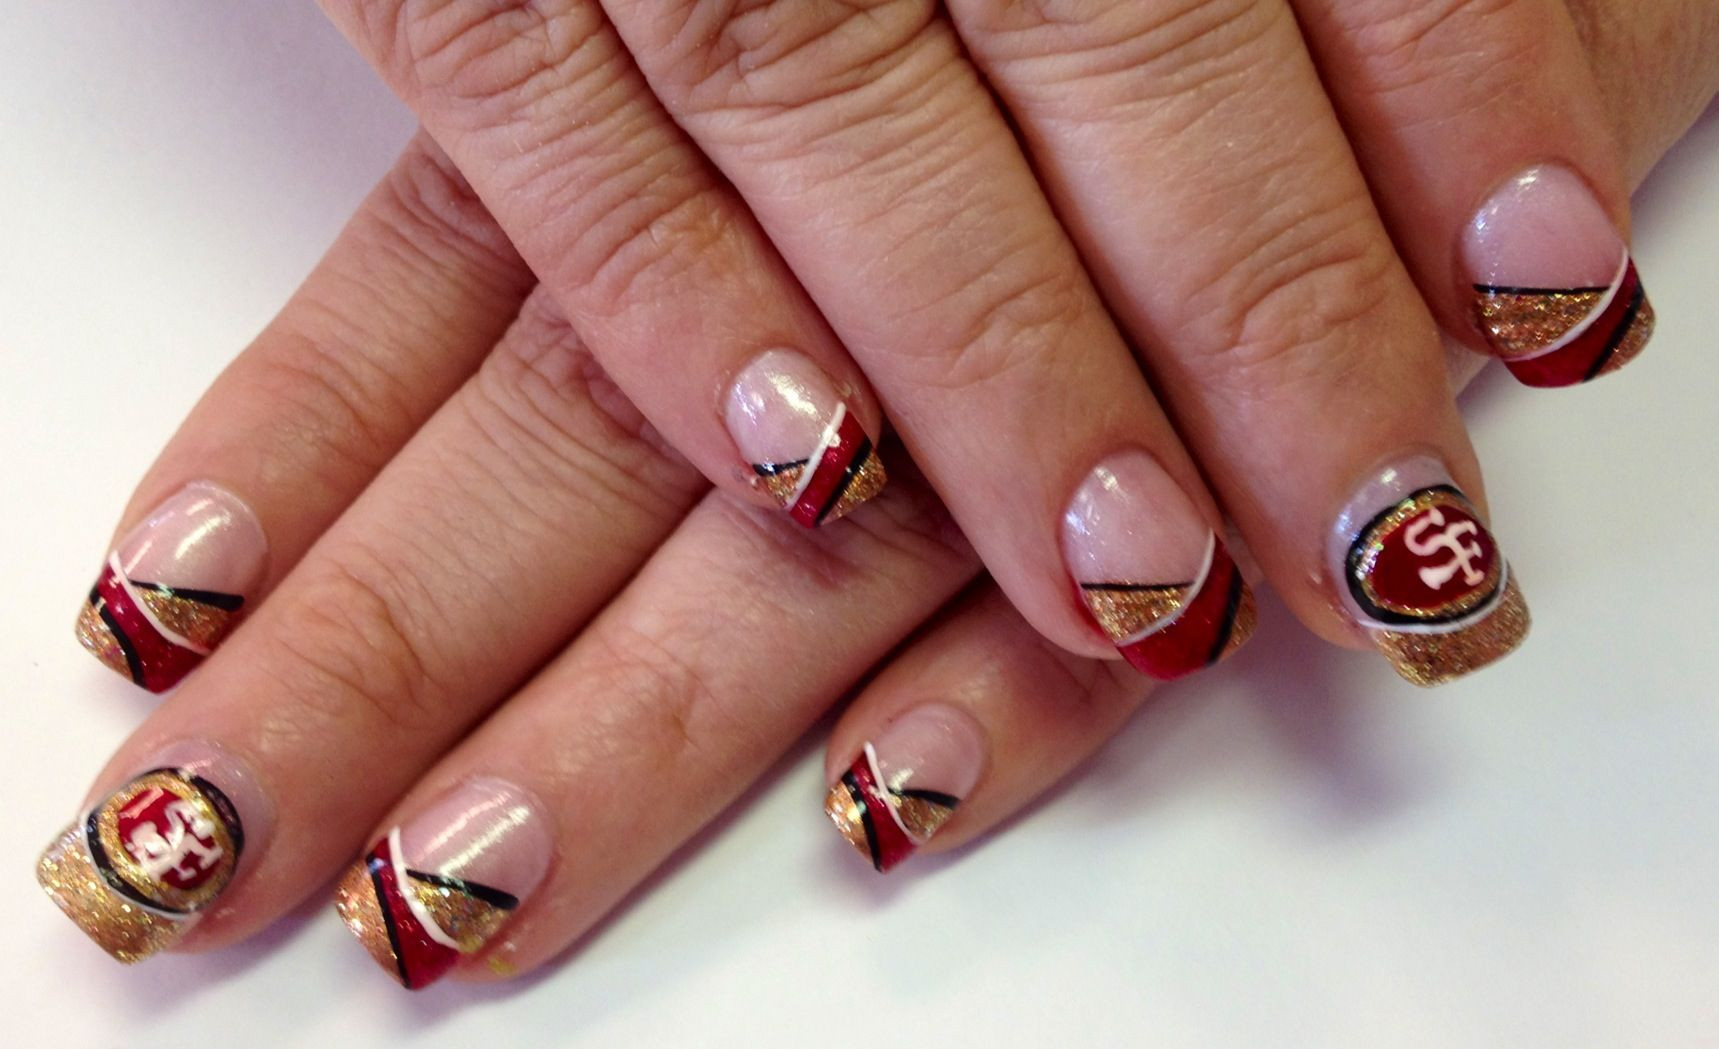 49er Nail Designs
 sanfrancisco 49ers nail art Nails by Jeannie Jackson The